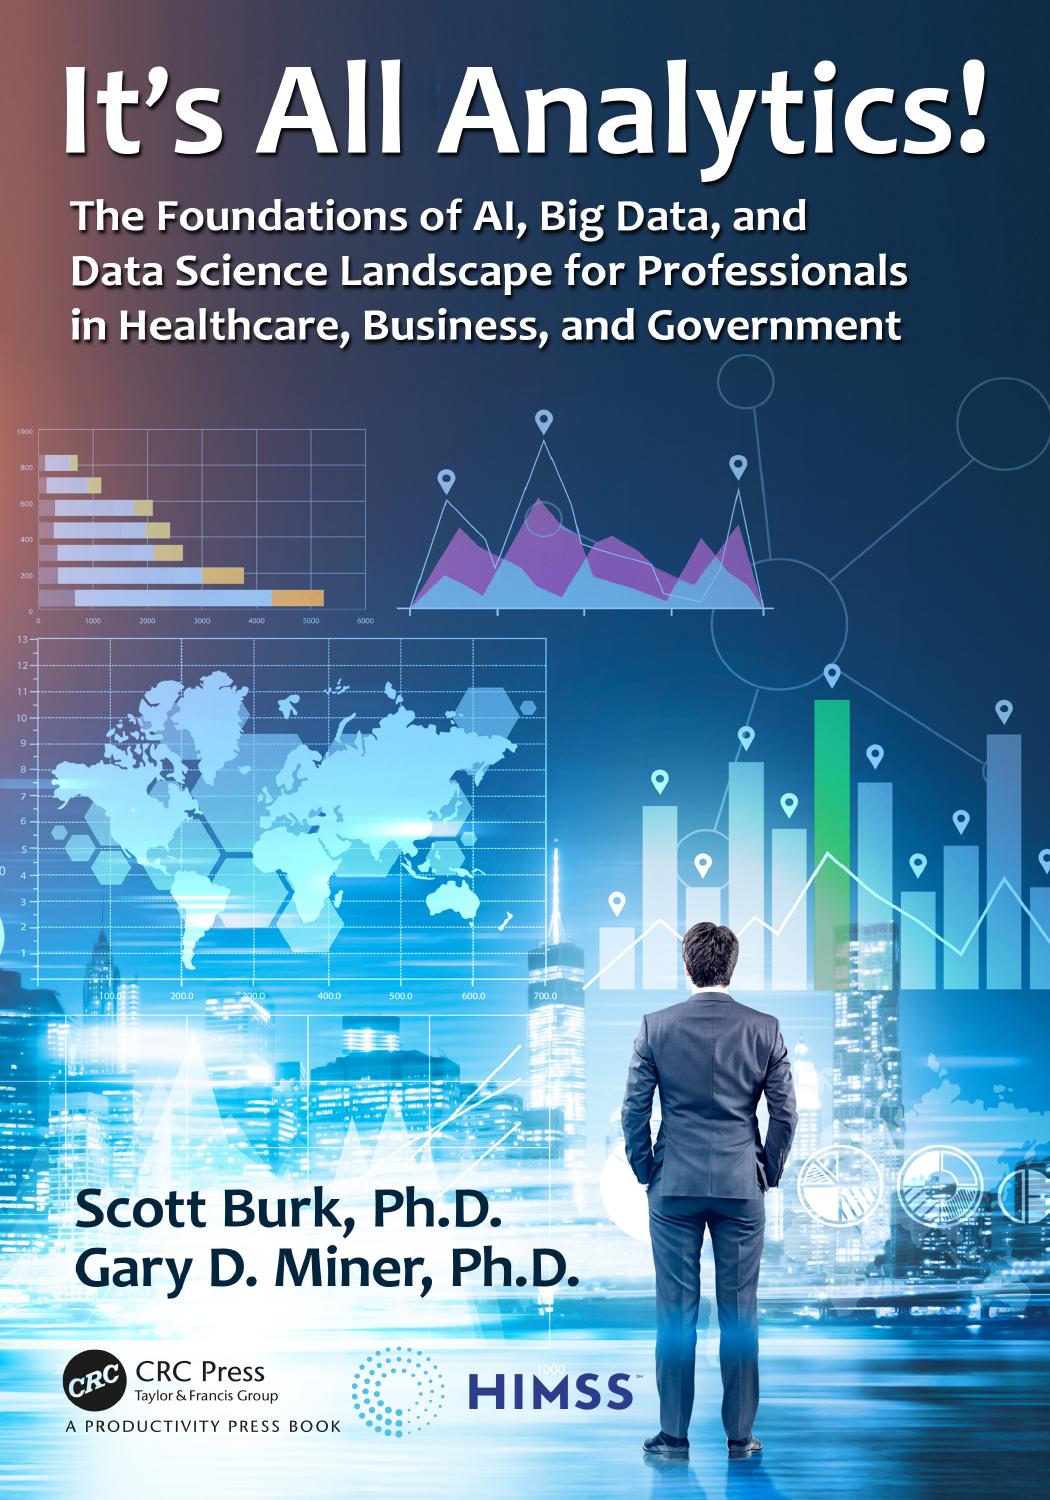 It’s All Analytics!: The Foundations of AI, Big Data, and Data Science Landscape for Professionals in Healthcare, Business, and Government